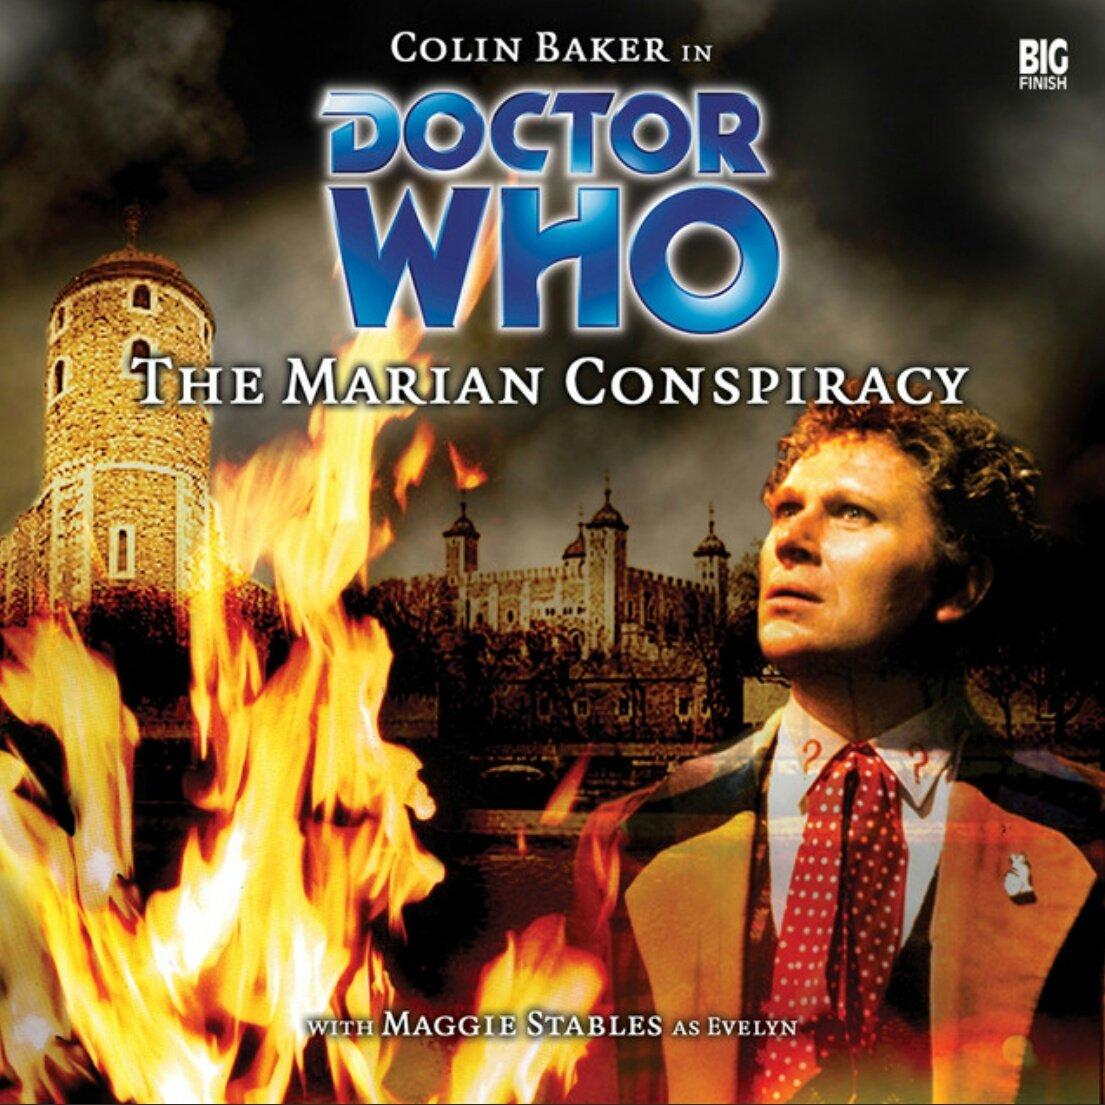  #BigFinish  #DoctorWho Main Range 006 - The Marian ConspiracyA fairly predictable historical, but a great script and introduction to new companion Evelyn. I love her - finally someone who can out-talk the Sixth Doctor! Looking forward to listening to more of her audios. 7/10